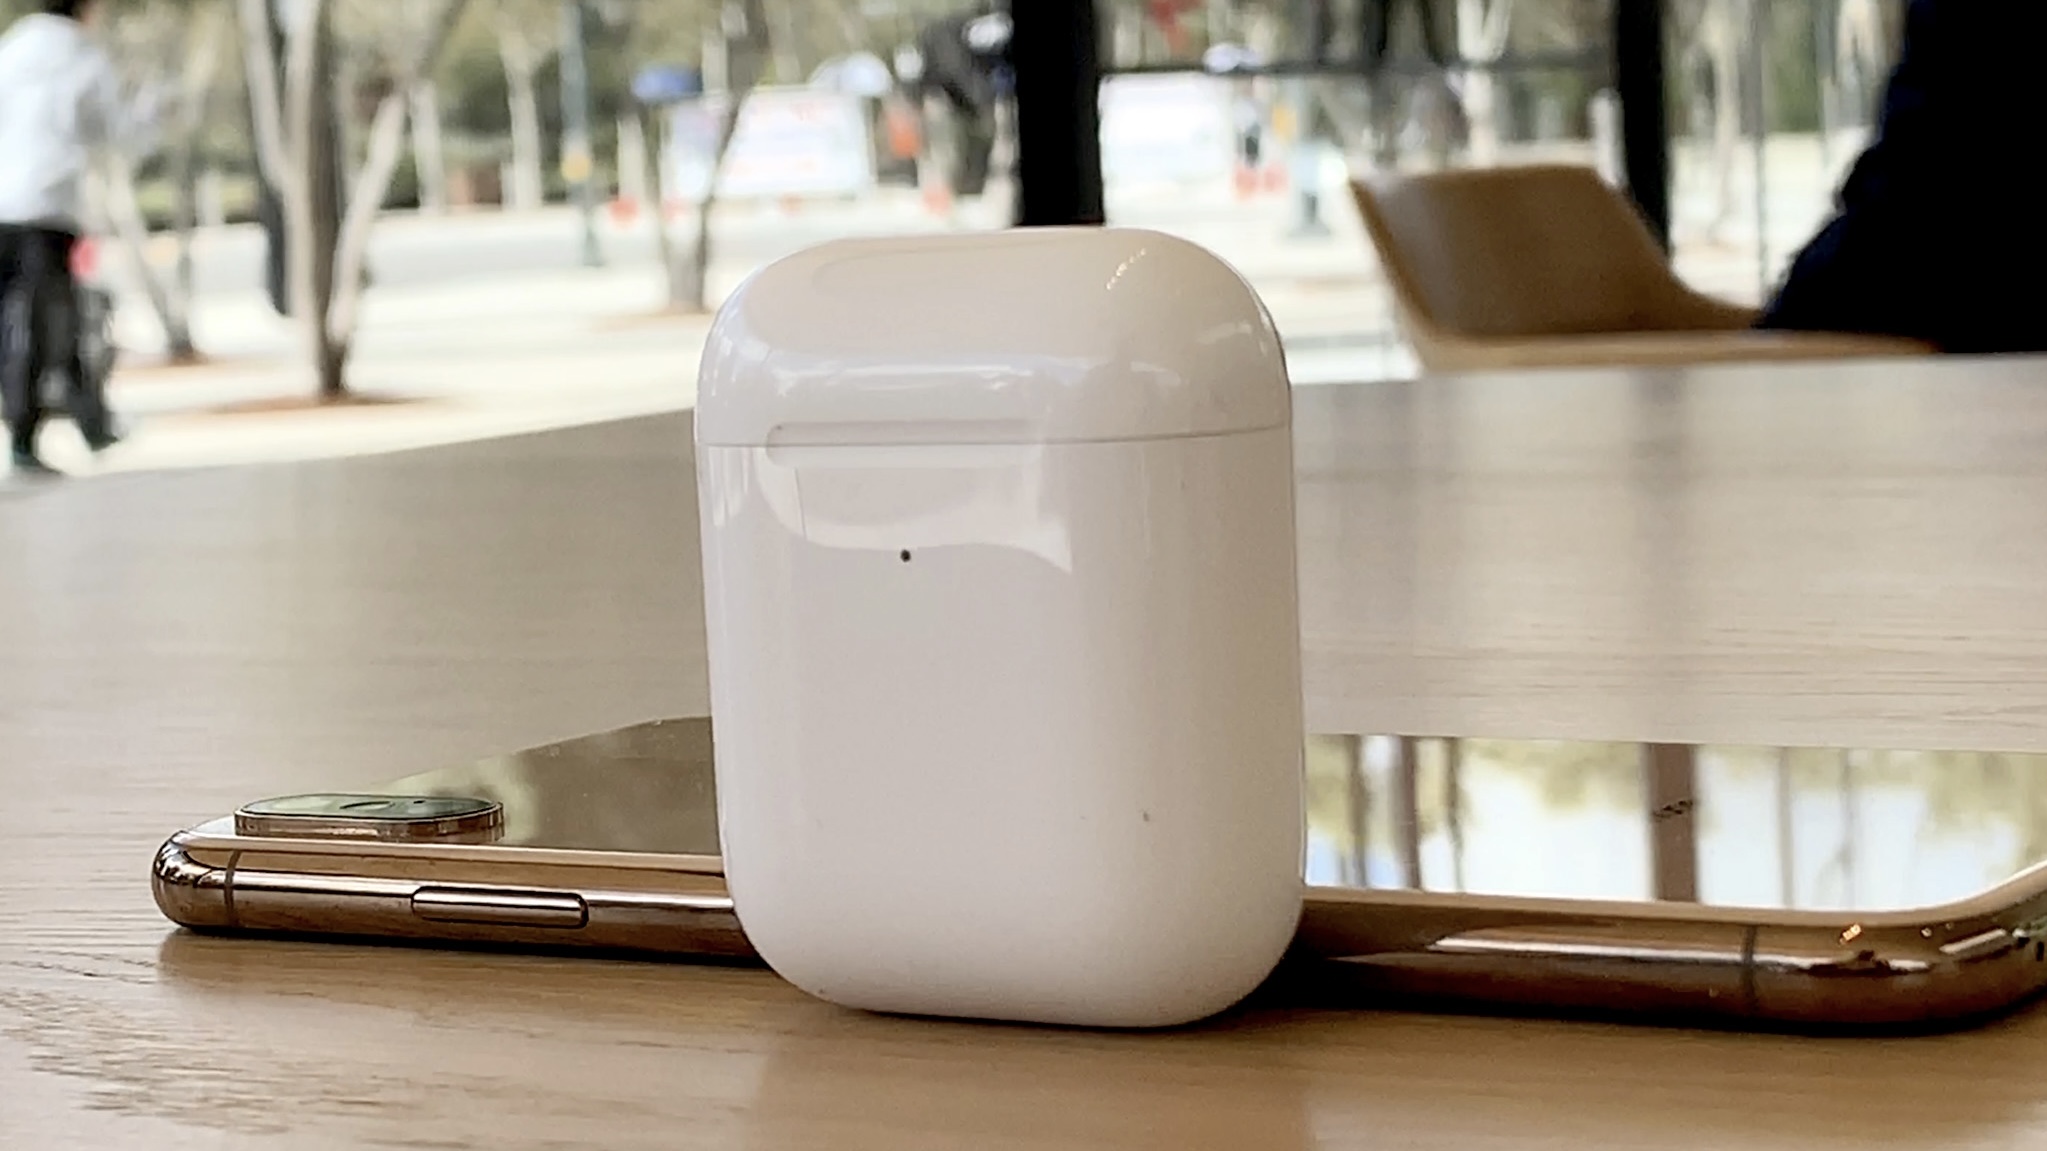 AirPods 2 Wireless Charging Case standing on table with gold iPhone XS behind